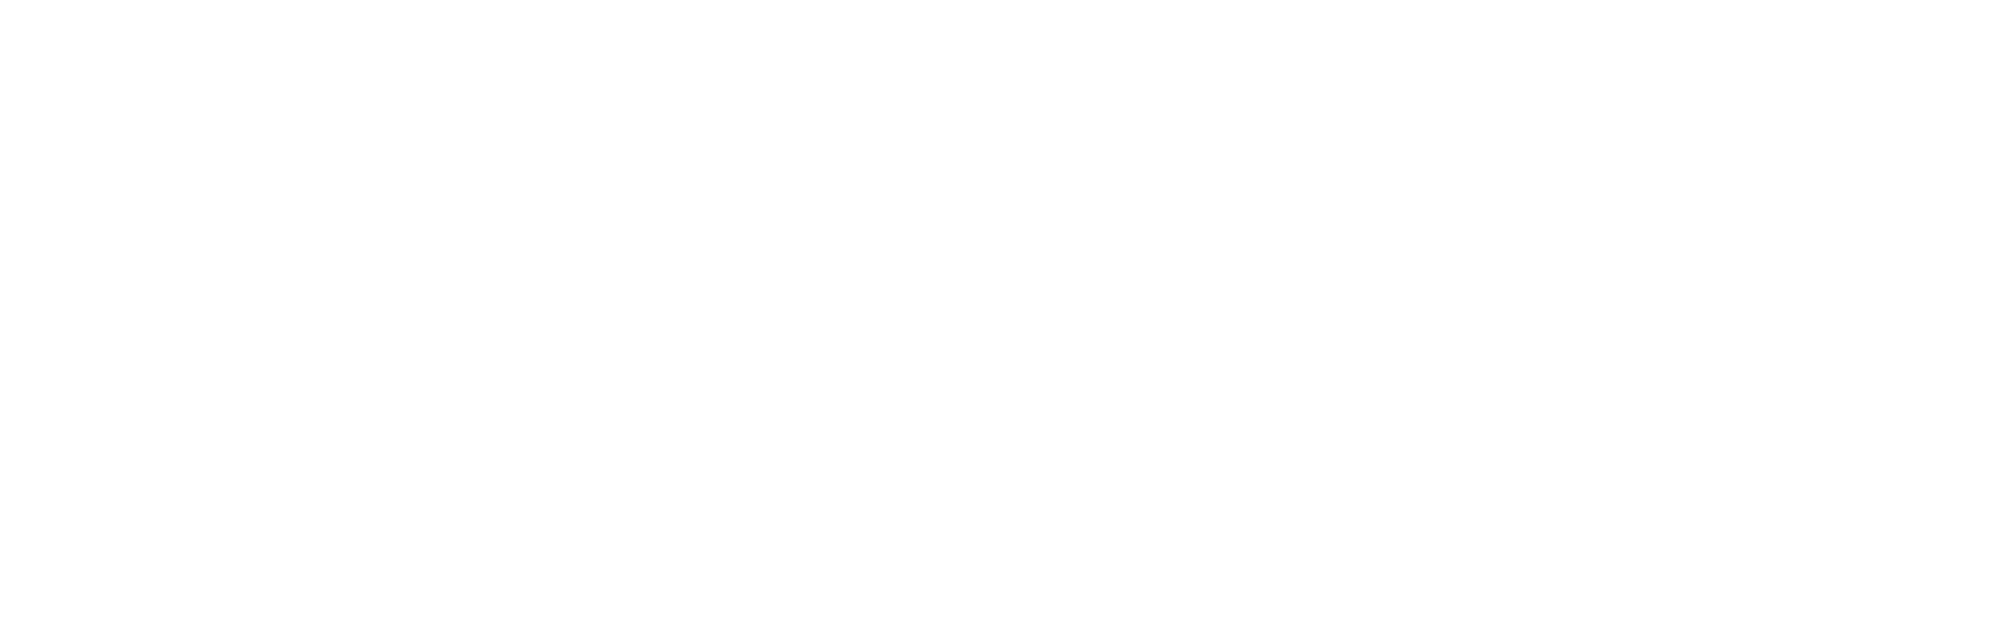 Voytel | All In One Hosted Voice Solution